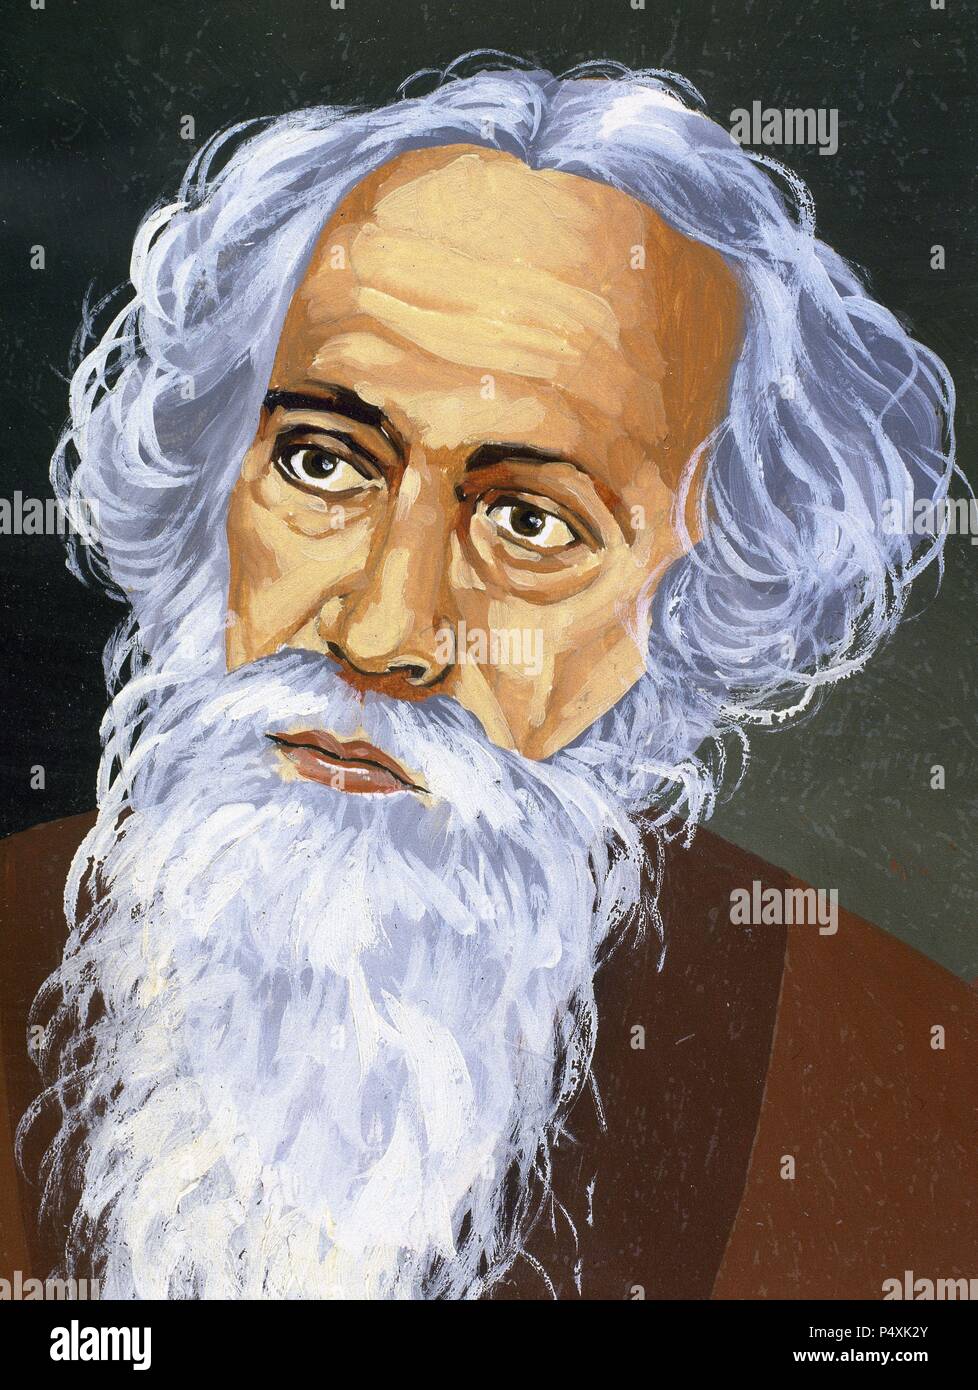 Rabindranath Tagore (1861-1941). Bengali poet, novelist, musician, painter and playwright. Nobel Prize in Literature in 1913. Stock Photo